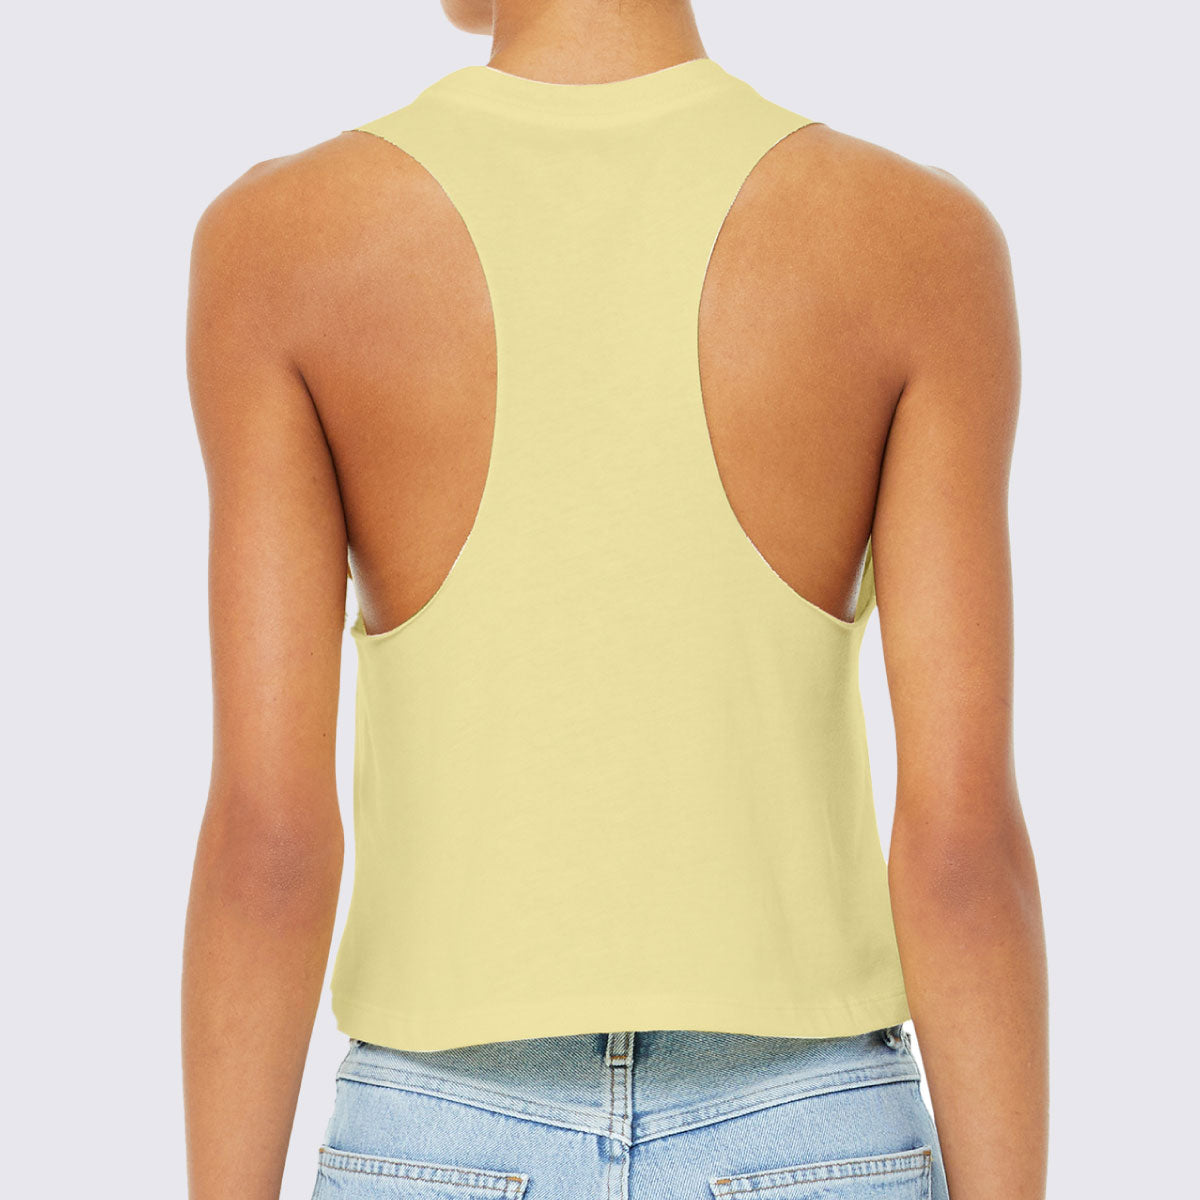 WOMEN'S RIBBED RACER BACK CROPPED TANK TOP